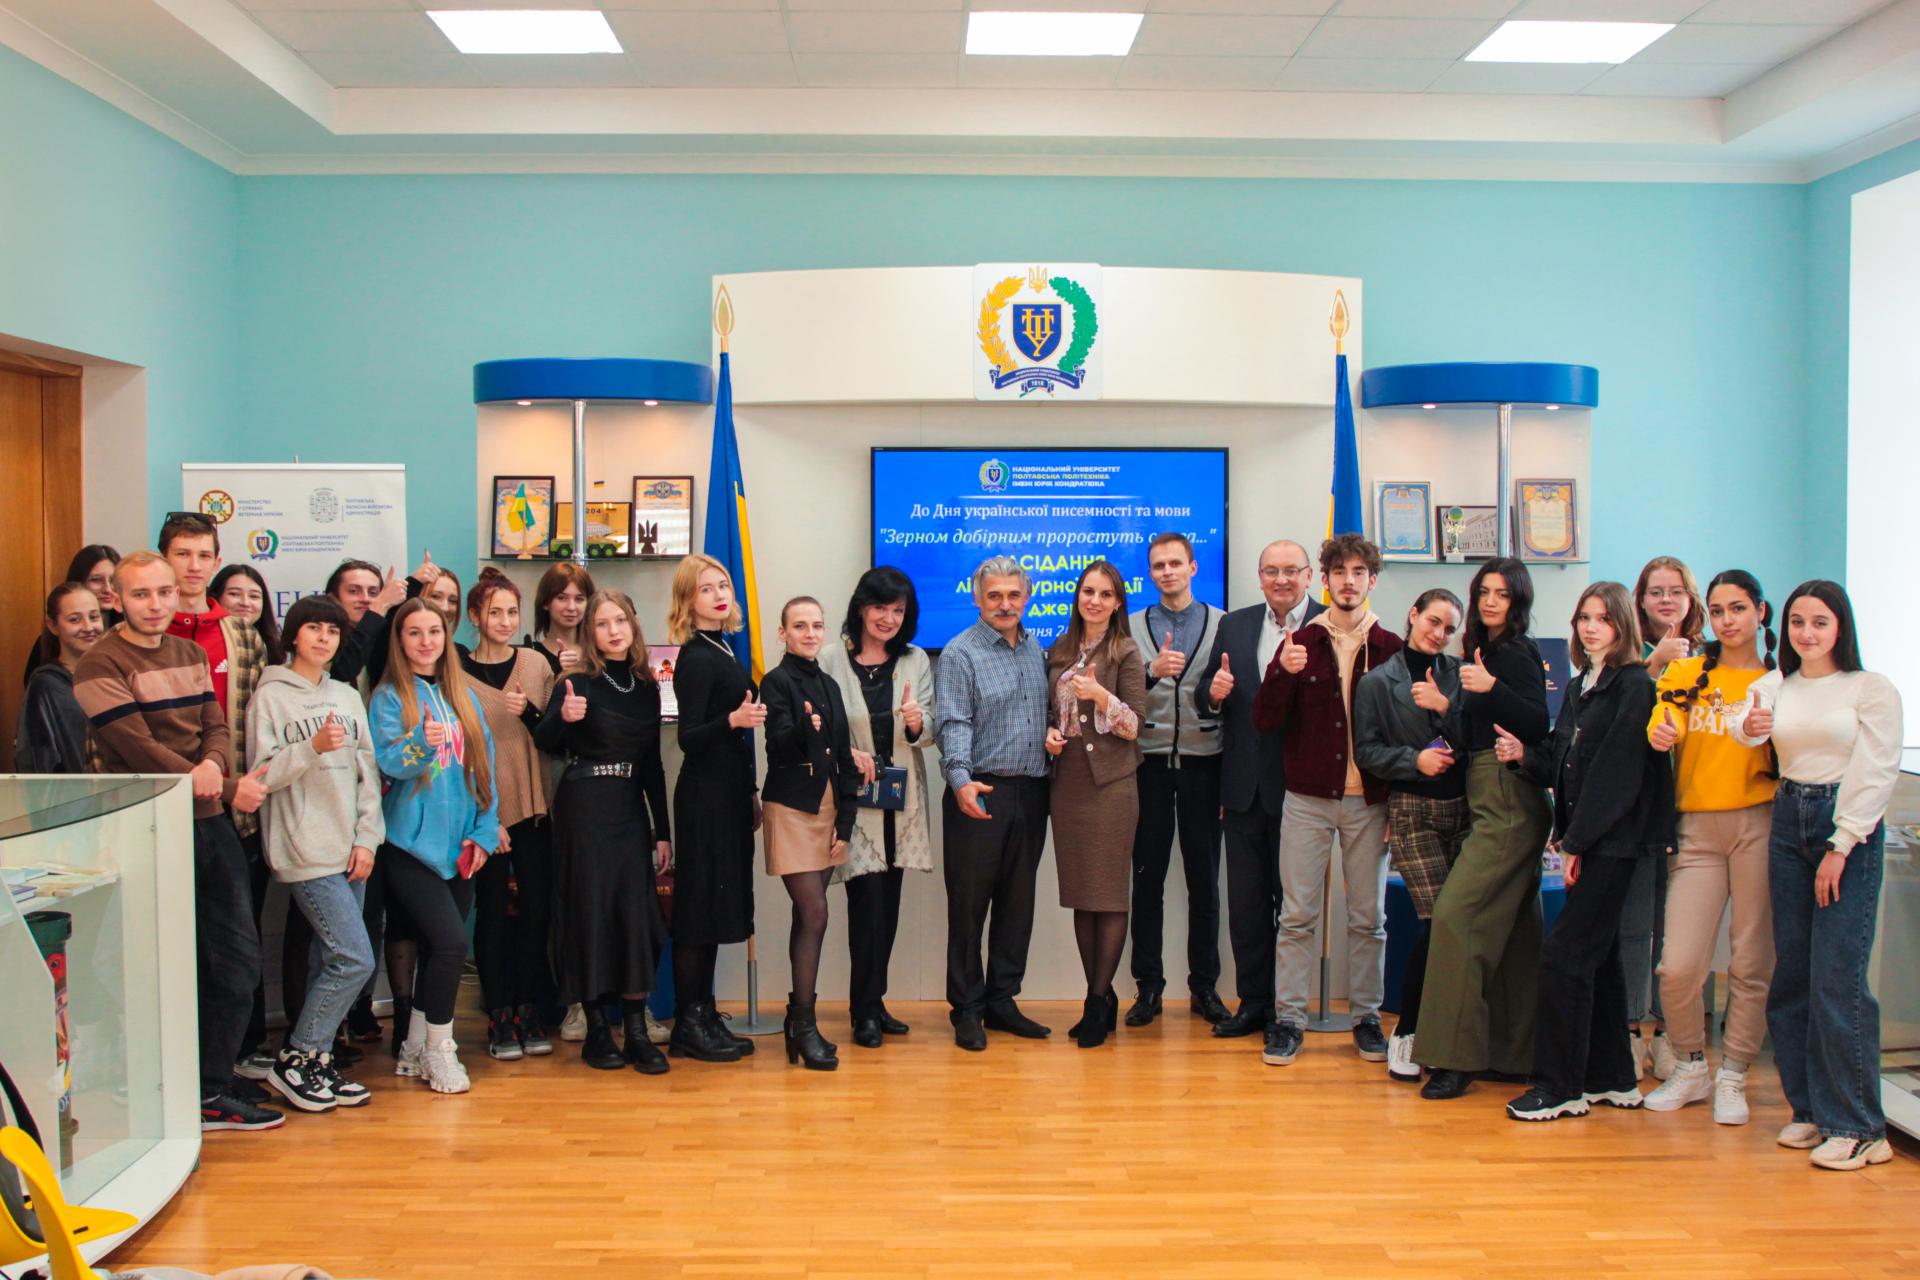 For the Day of Ukrainian Literature and Language, a meeting of the literary studio “To the Origins” is held at the Poltava Polytechnic